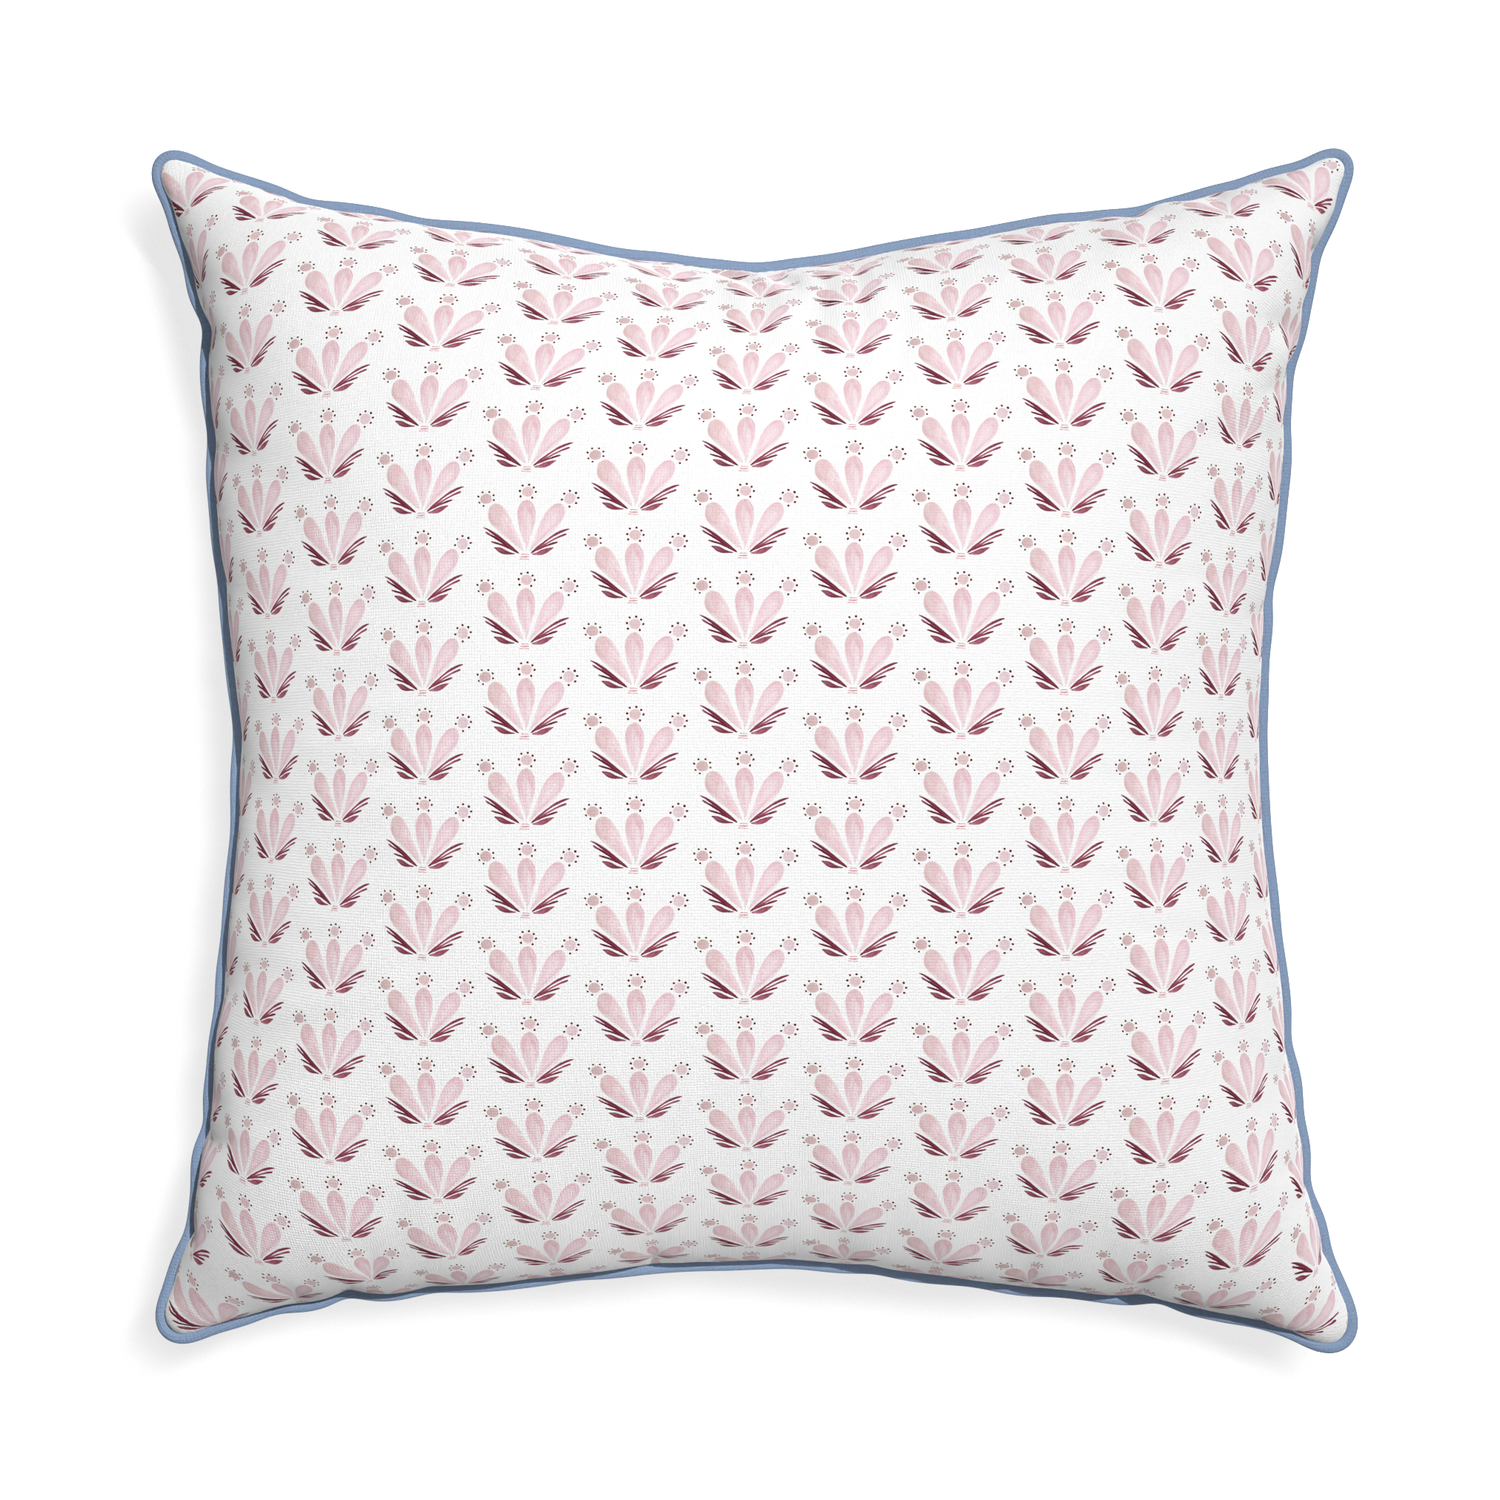 Euro-sham serena pink custom pillow with sky piping on white background